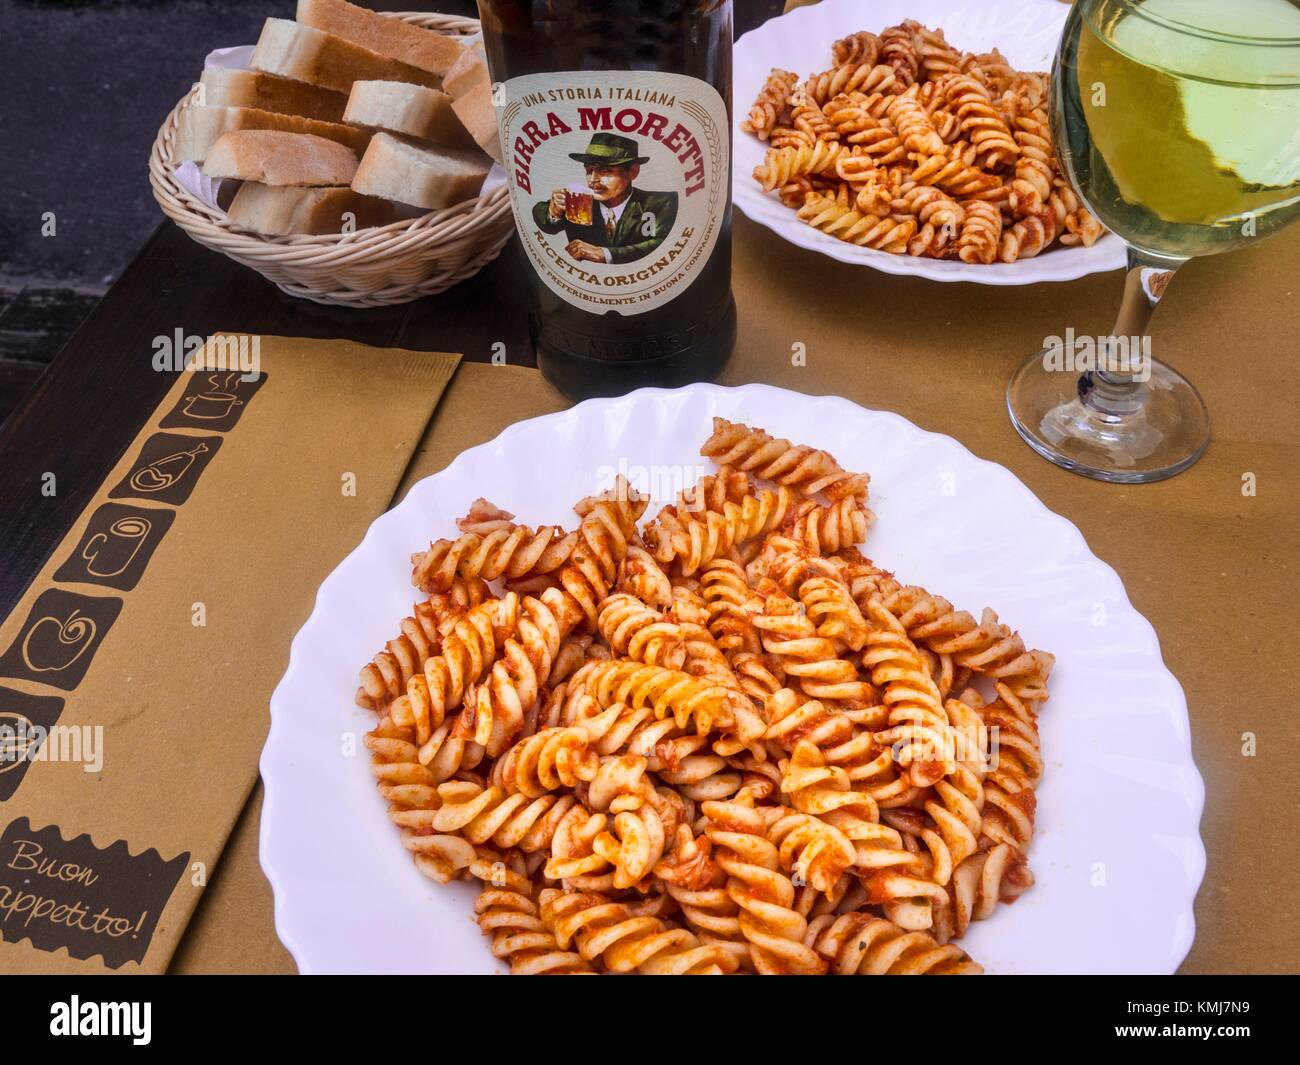 Italy- Food an Beverage- ''Pasta'' with tomatoes sauce, Local beer and white wine. Stock Photo